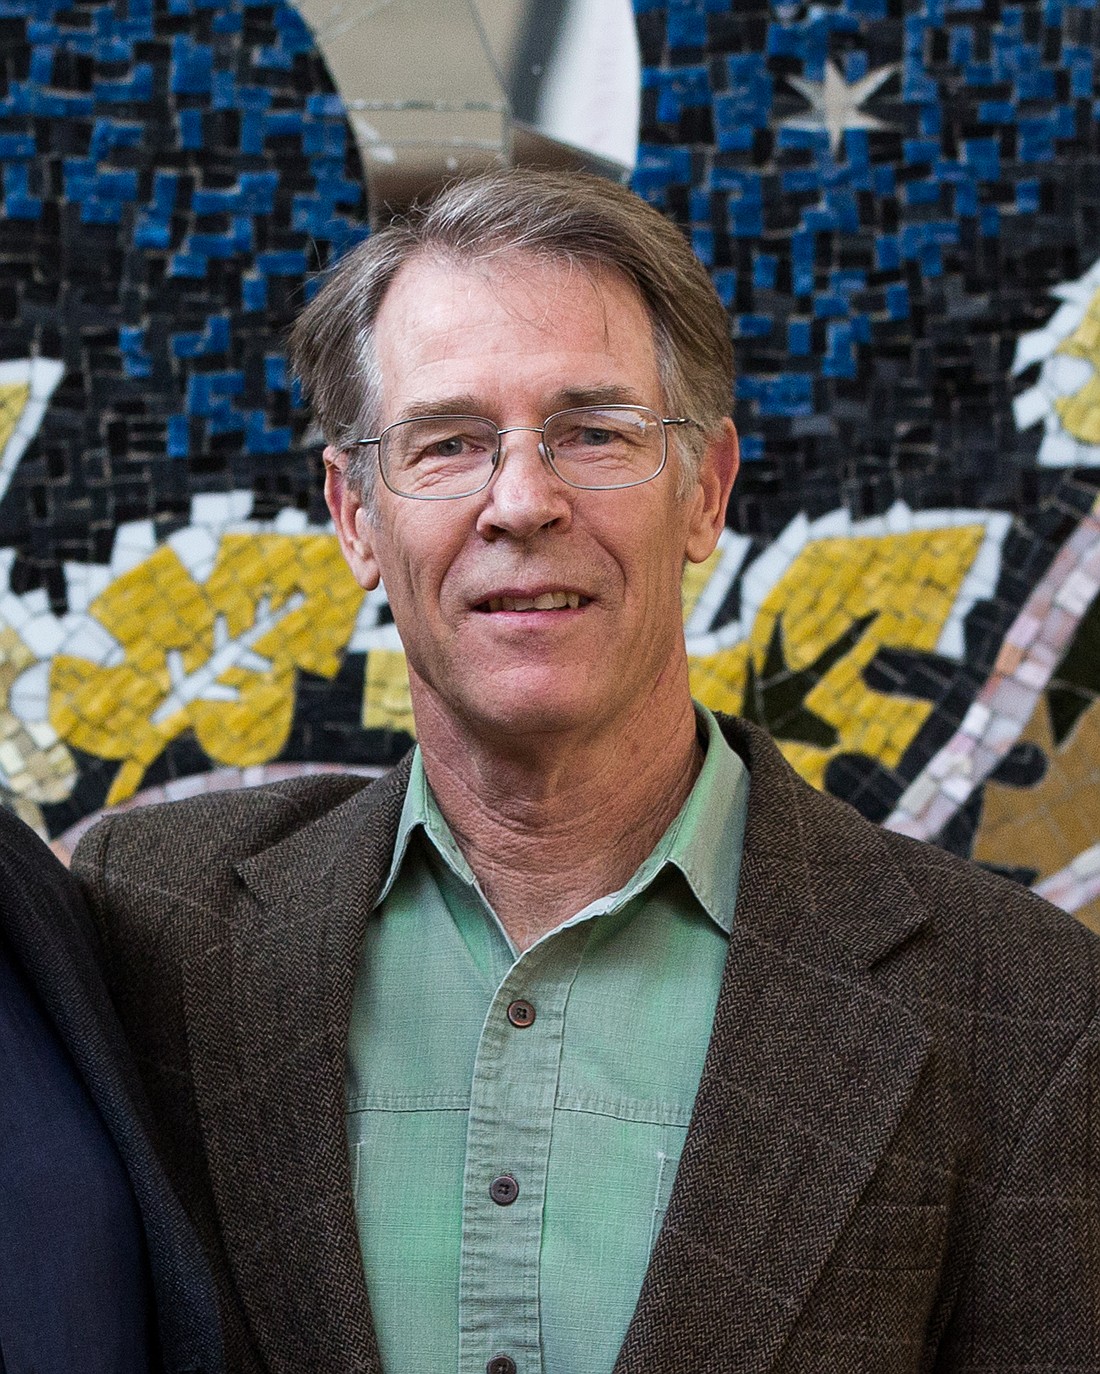 Bestselling science fiction author Kim Stanley Robinson offers hope for humanity in his new novel, "The Ministry for the Future."